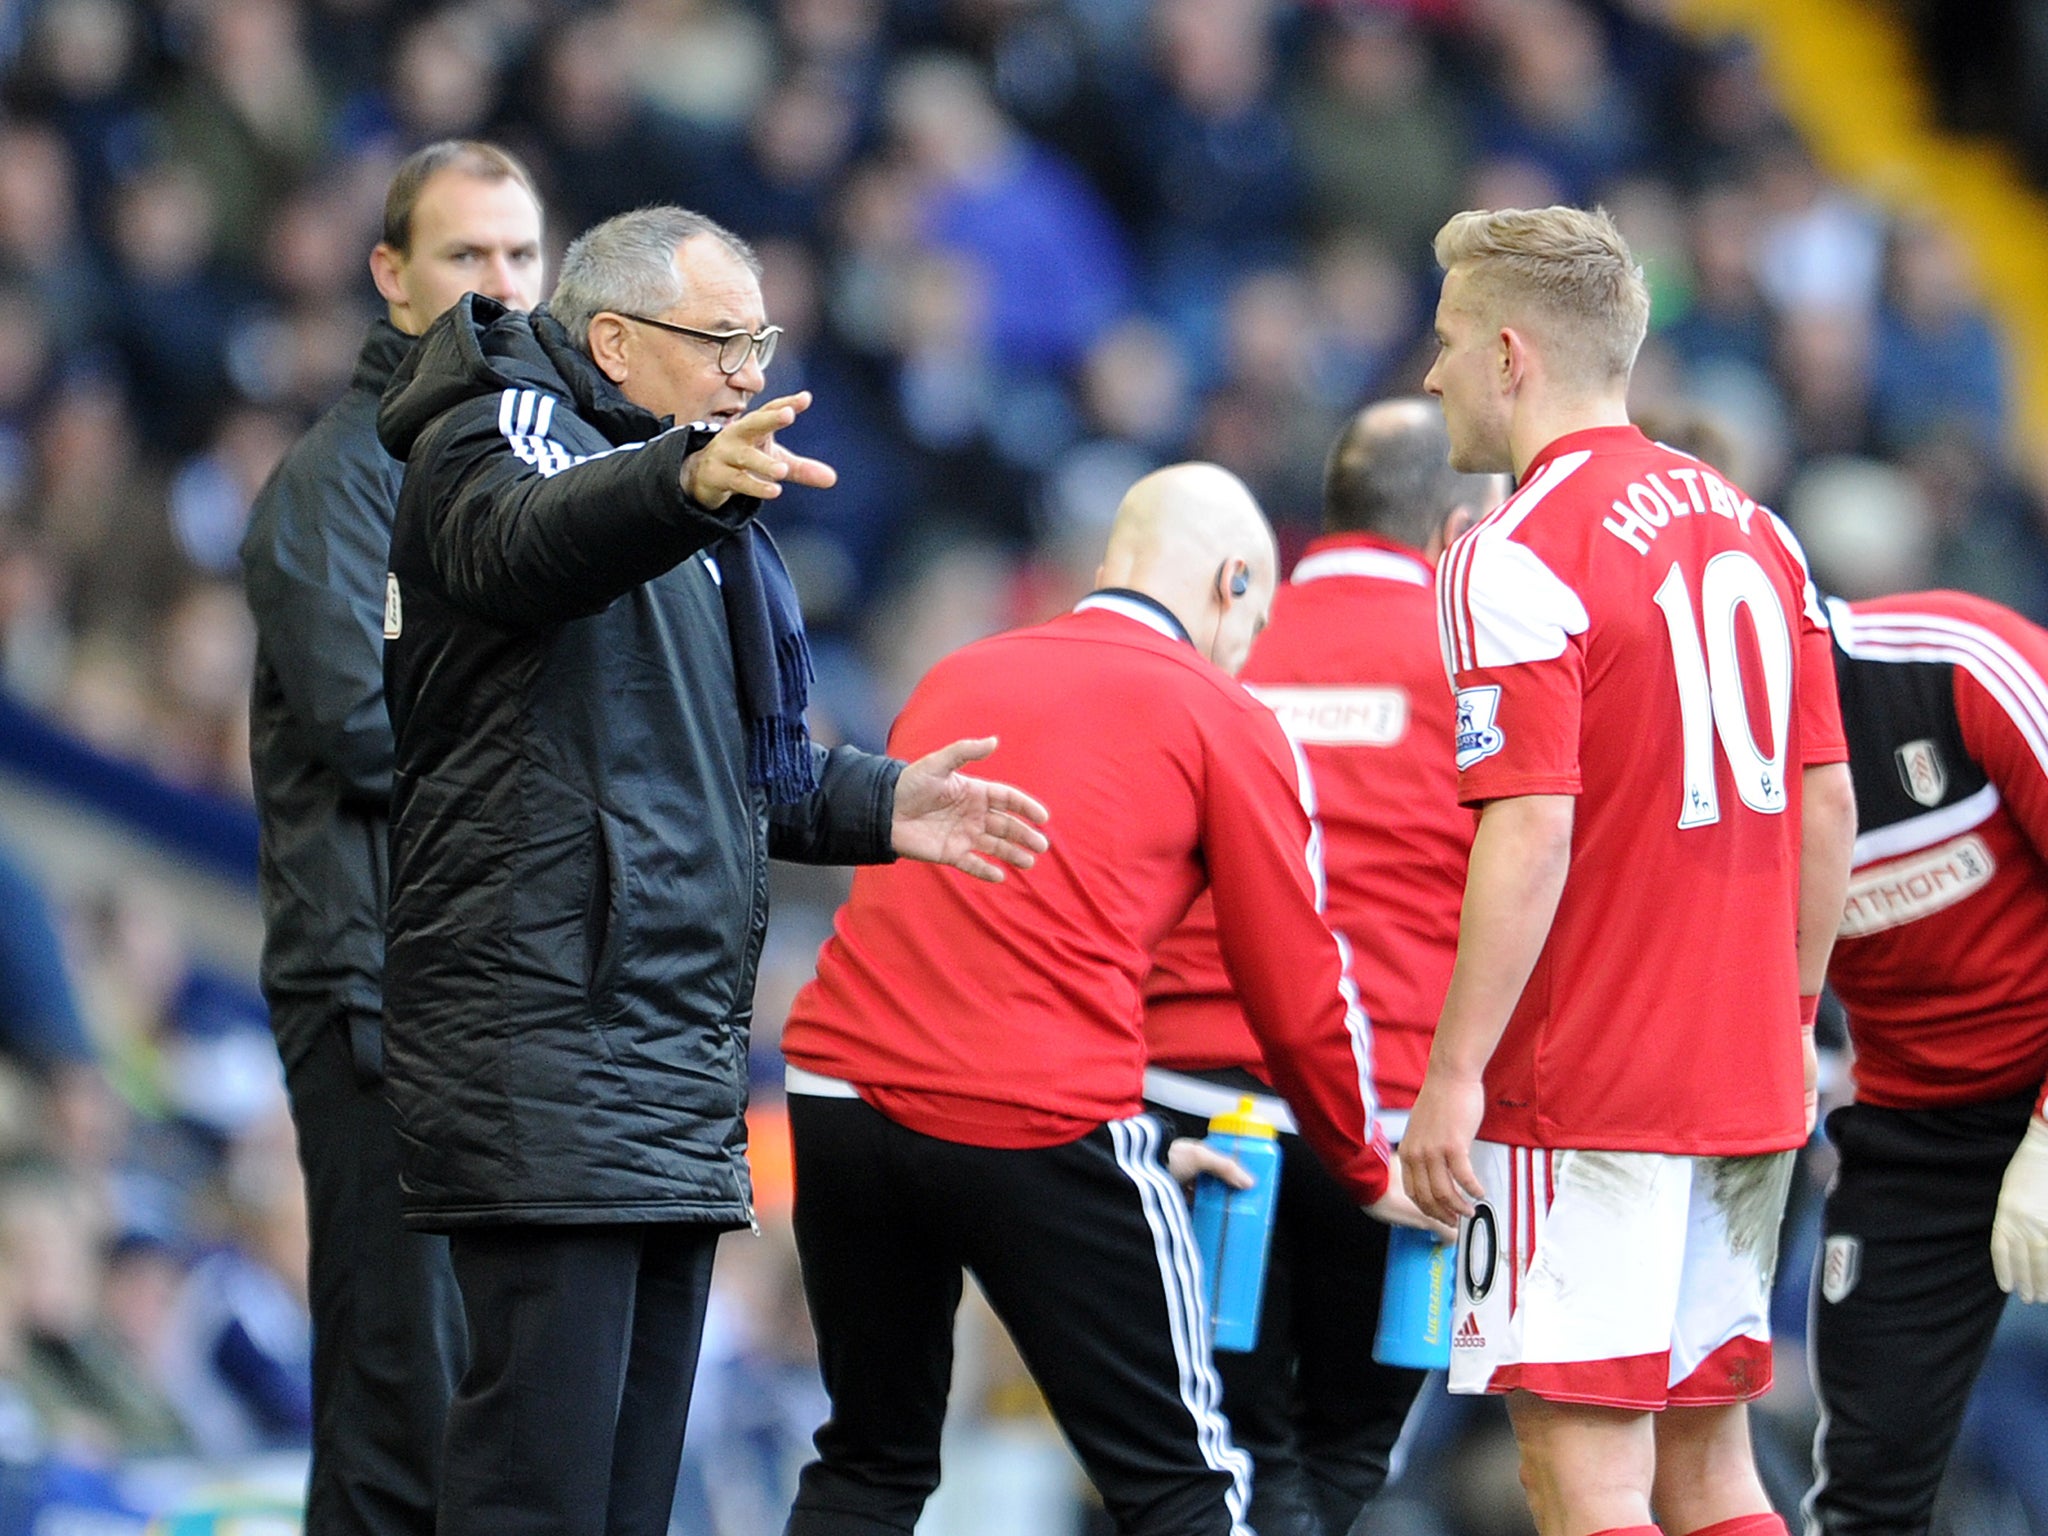 Felix Magath manager of Fulham during the Barclays Premier League match between West Bromwich Albion and Fulham at the Hawthorns